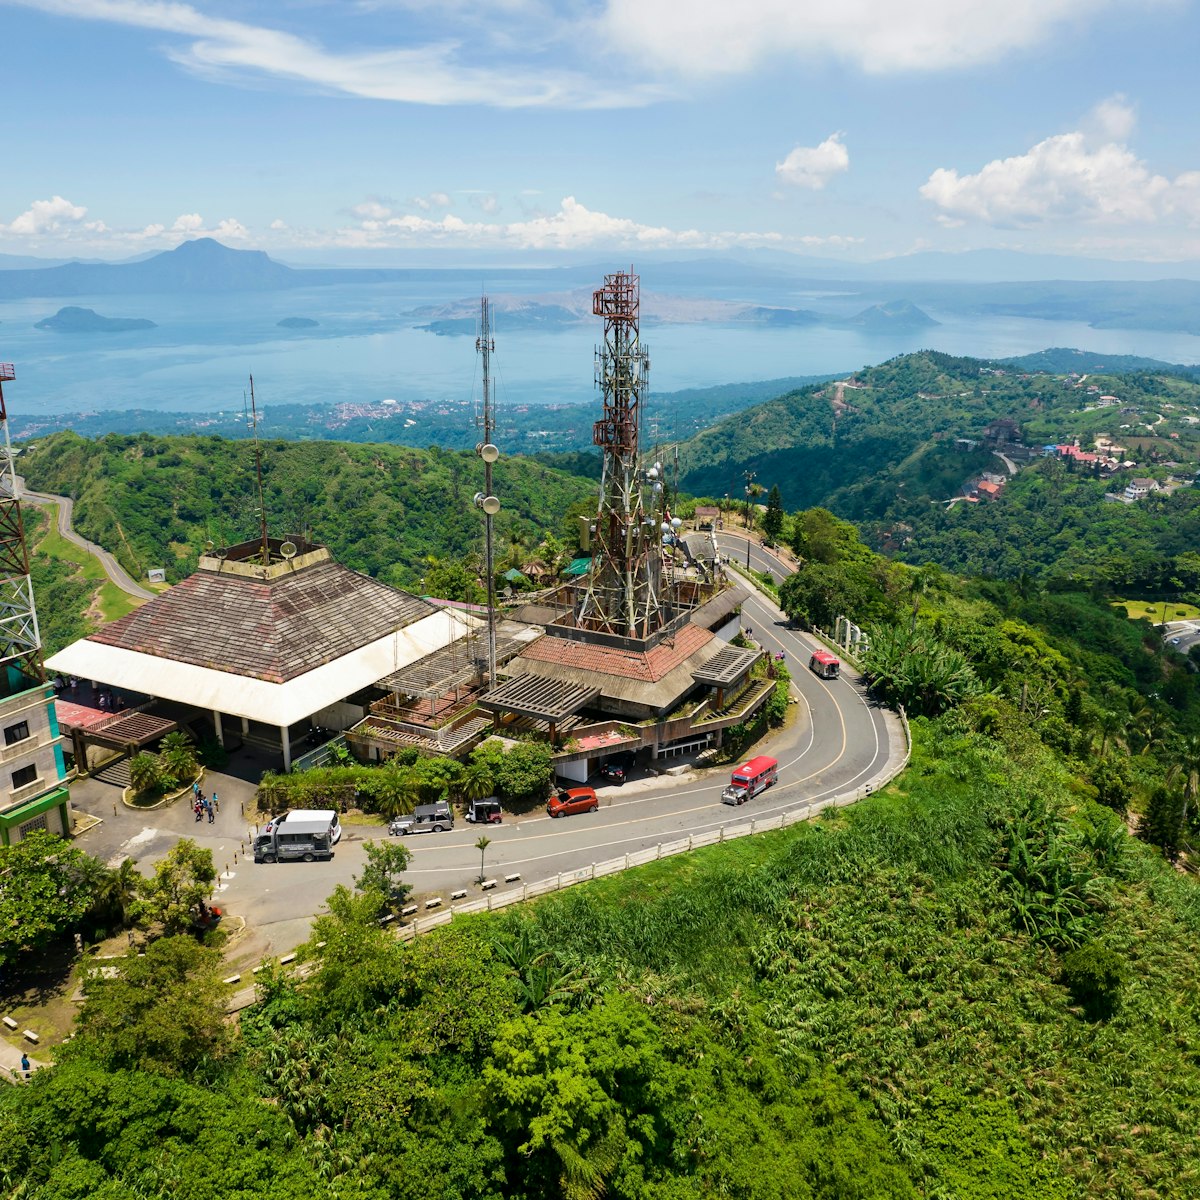 Aerial view of People's Park in the Sky perched atop Mount Sungay overlooking Taal volcano and lake. A Doppler weather radar station is found within the complex.